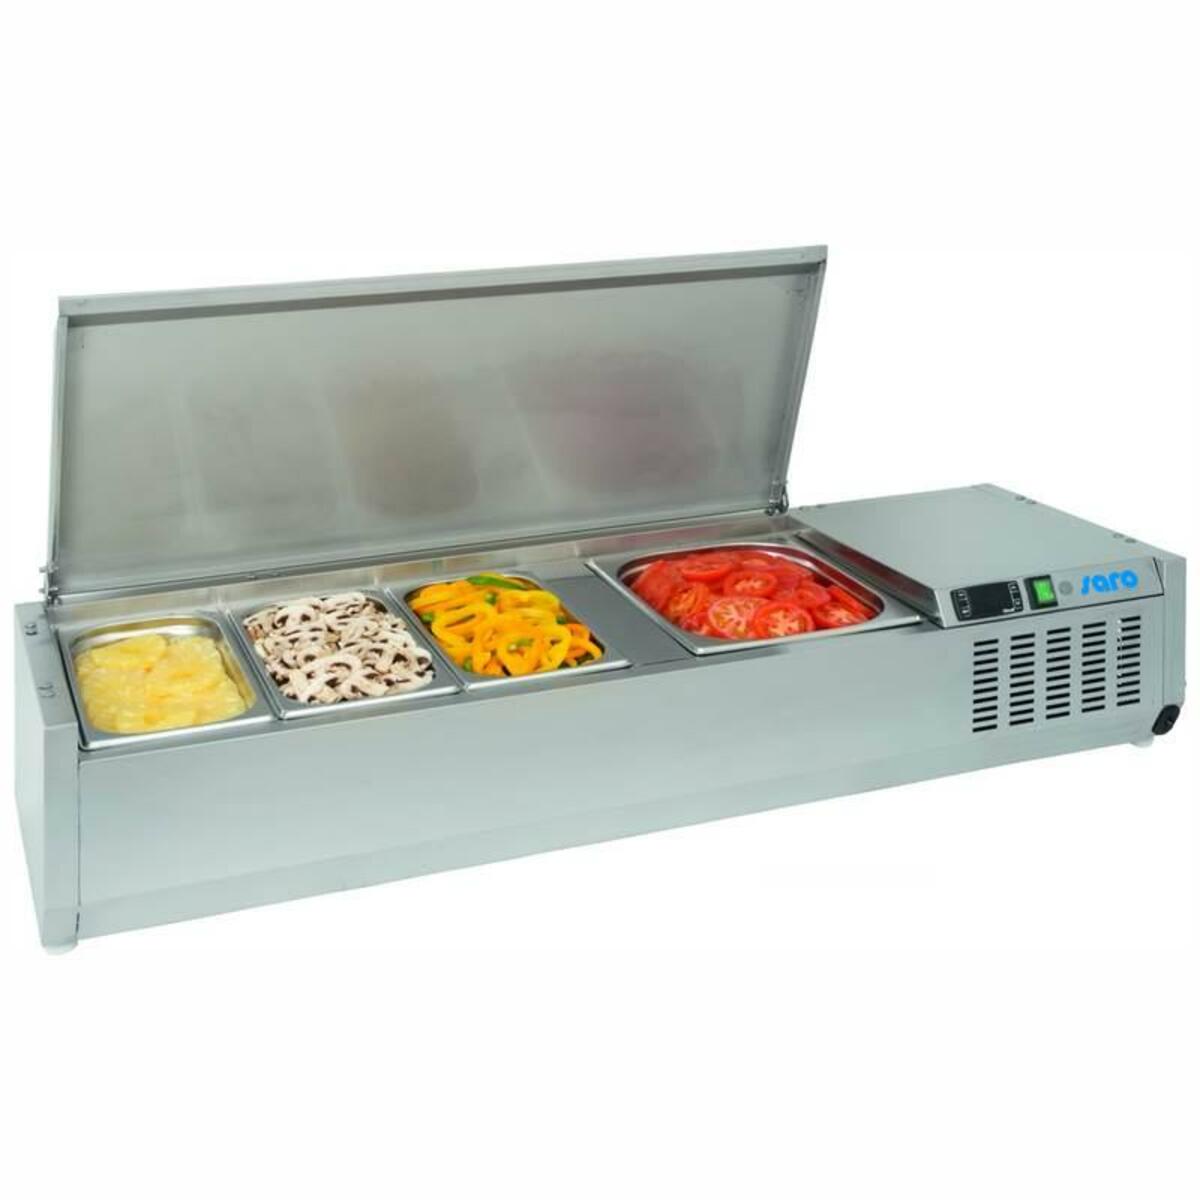 Saladette 6 bacs GN 1/3 couvercle inox GM